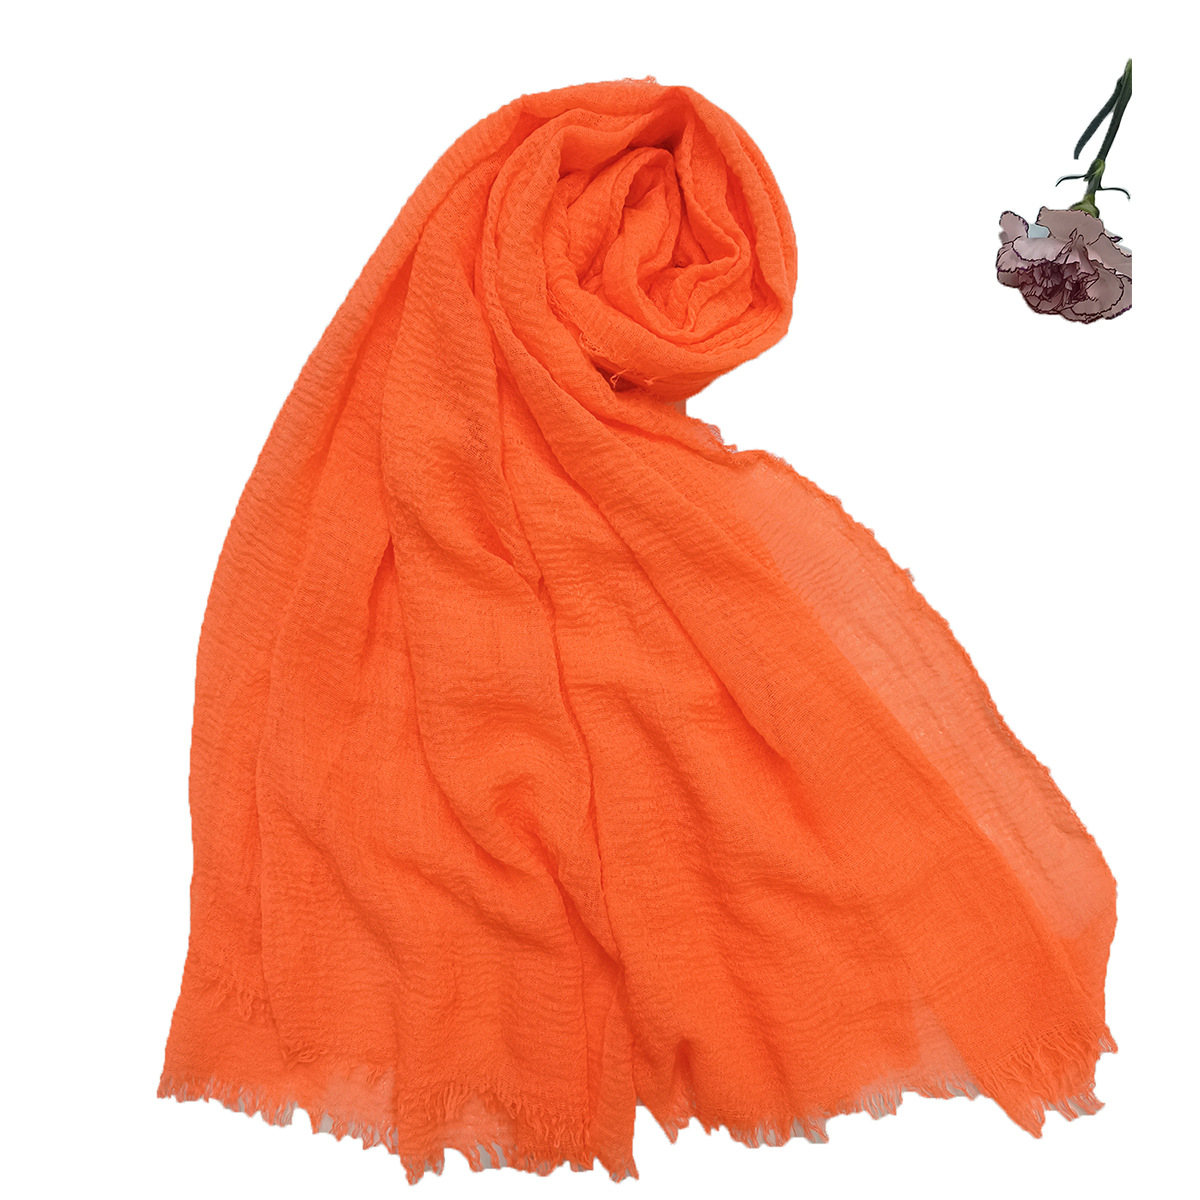 New European and American Export Exclusive for Cross-Border Fluorescent Cotton Linen Shawl Scarf